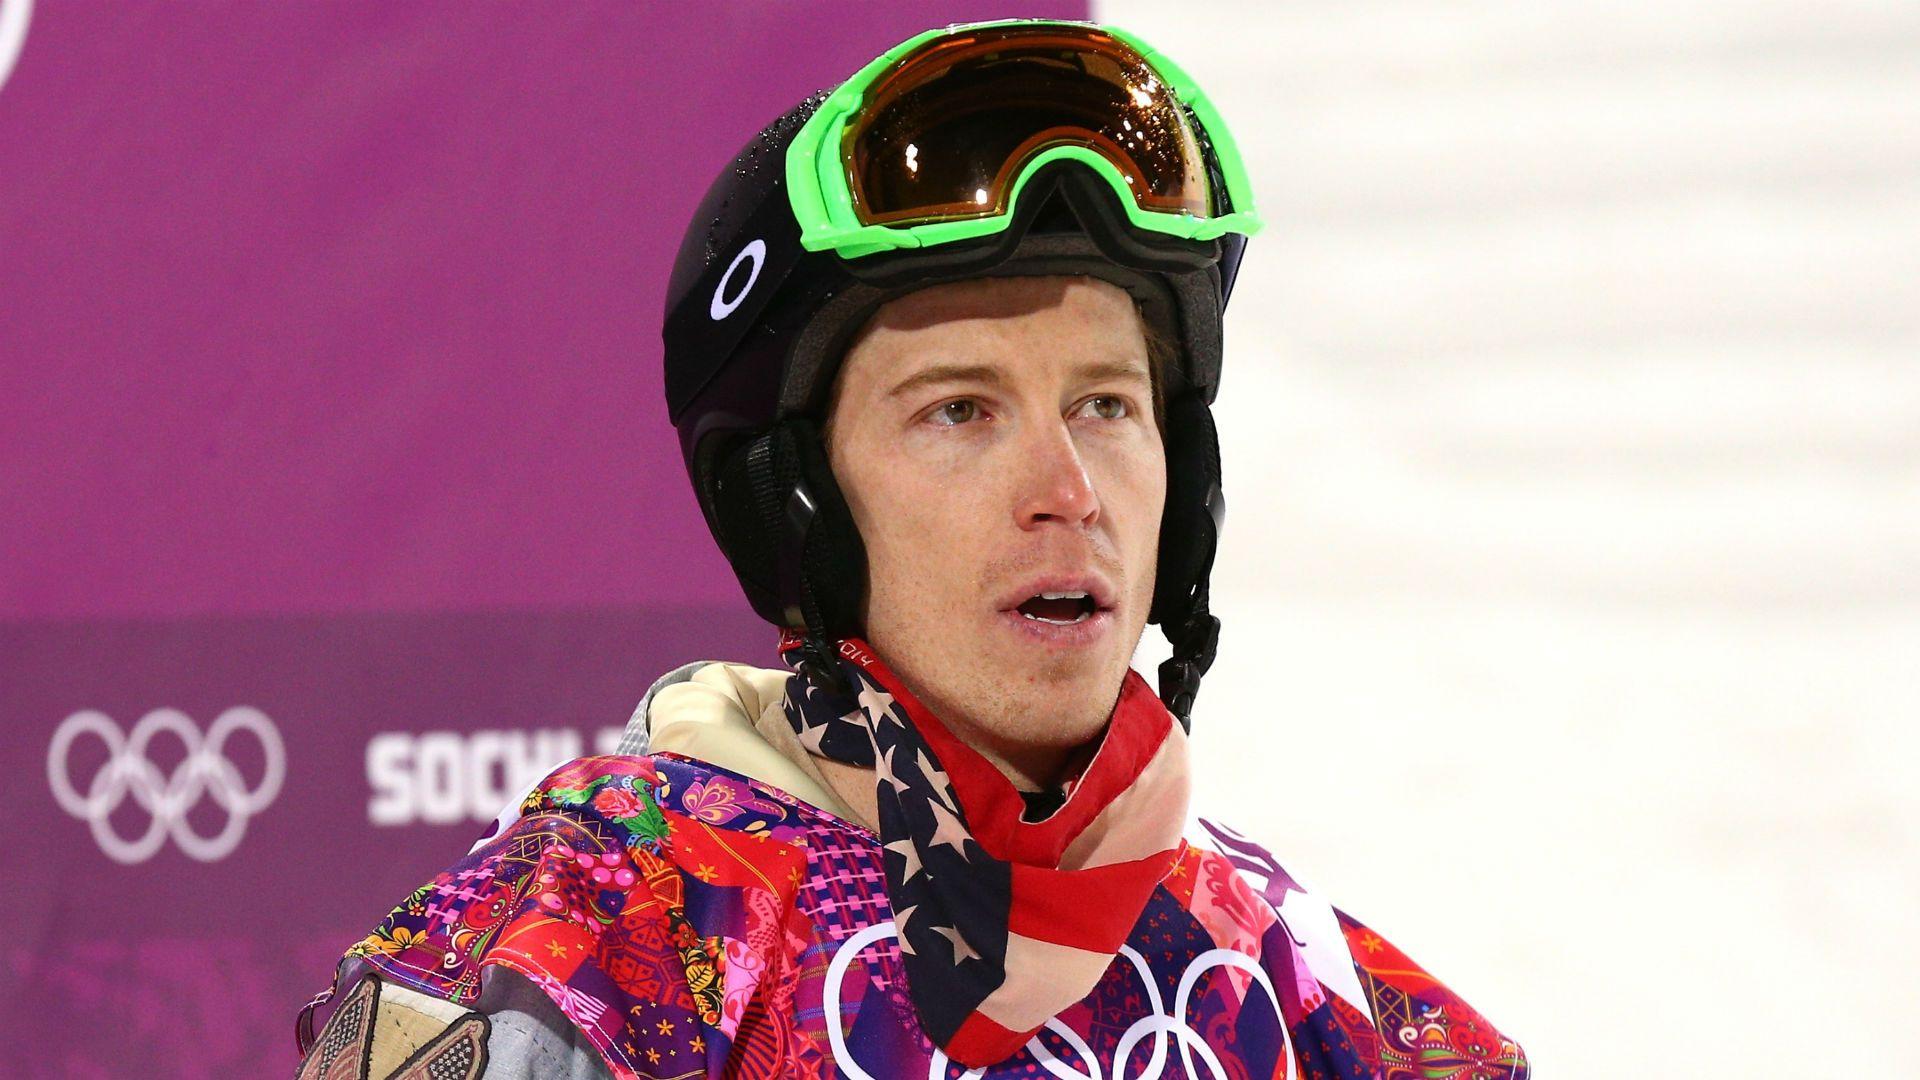 Shaun White at the 2018 Winter Olympics: How to watch, events